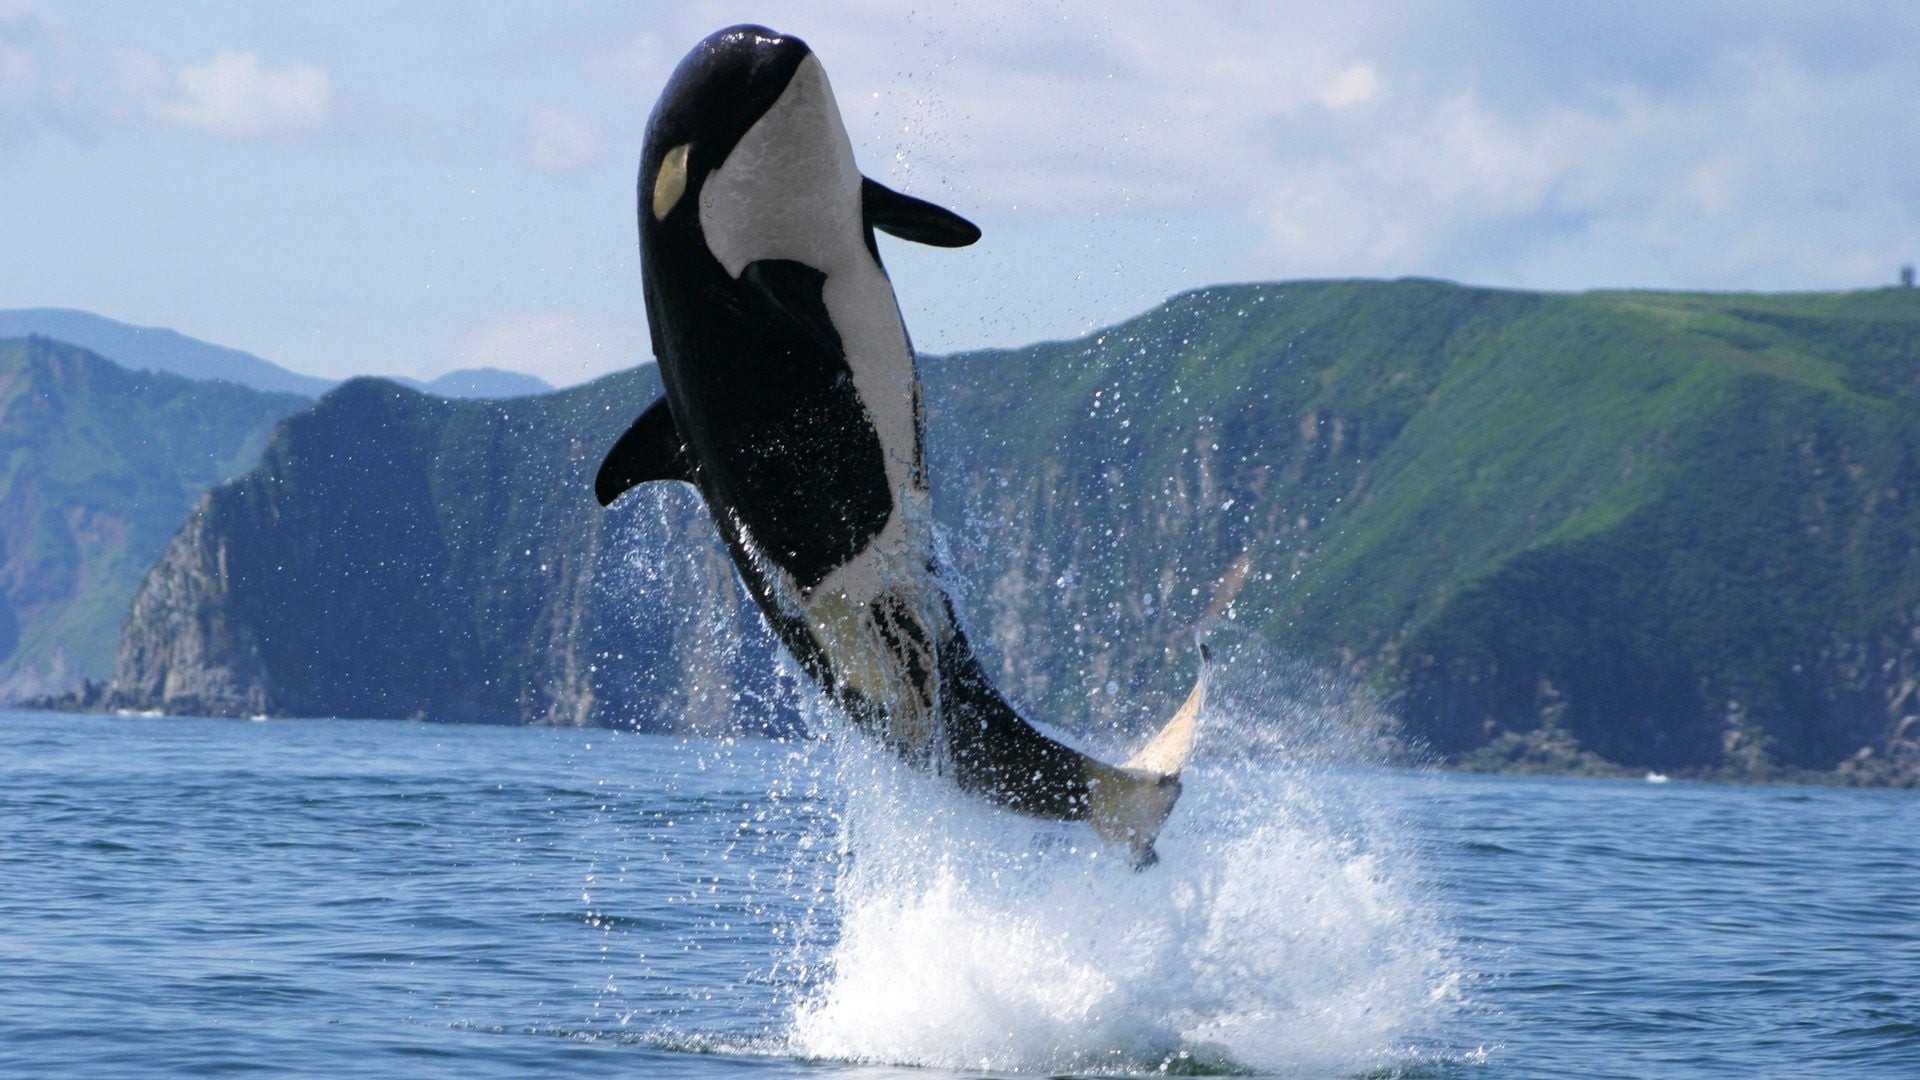 1920x1080 Image of Orca Killer Whale